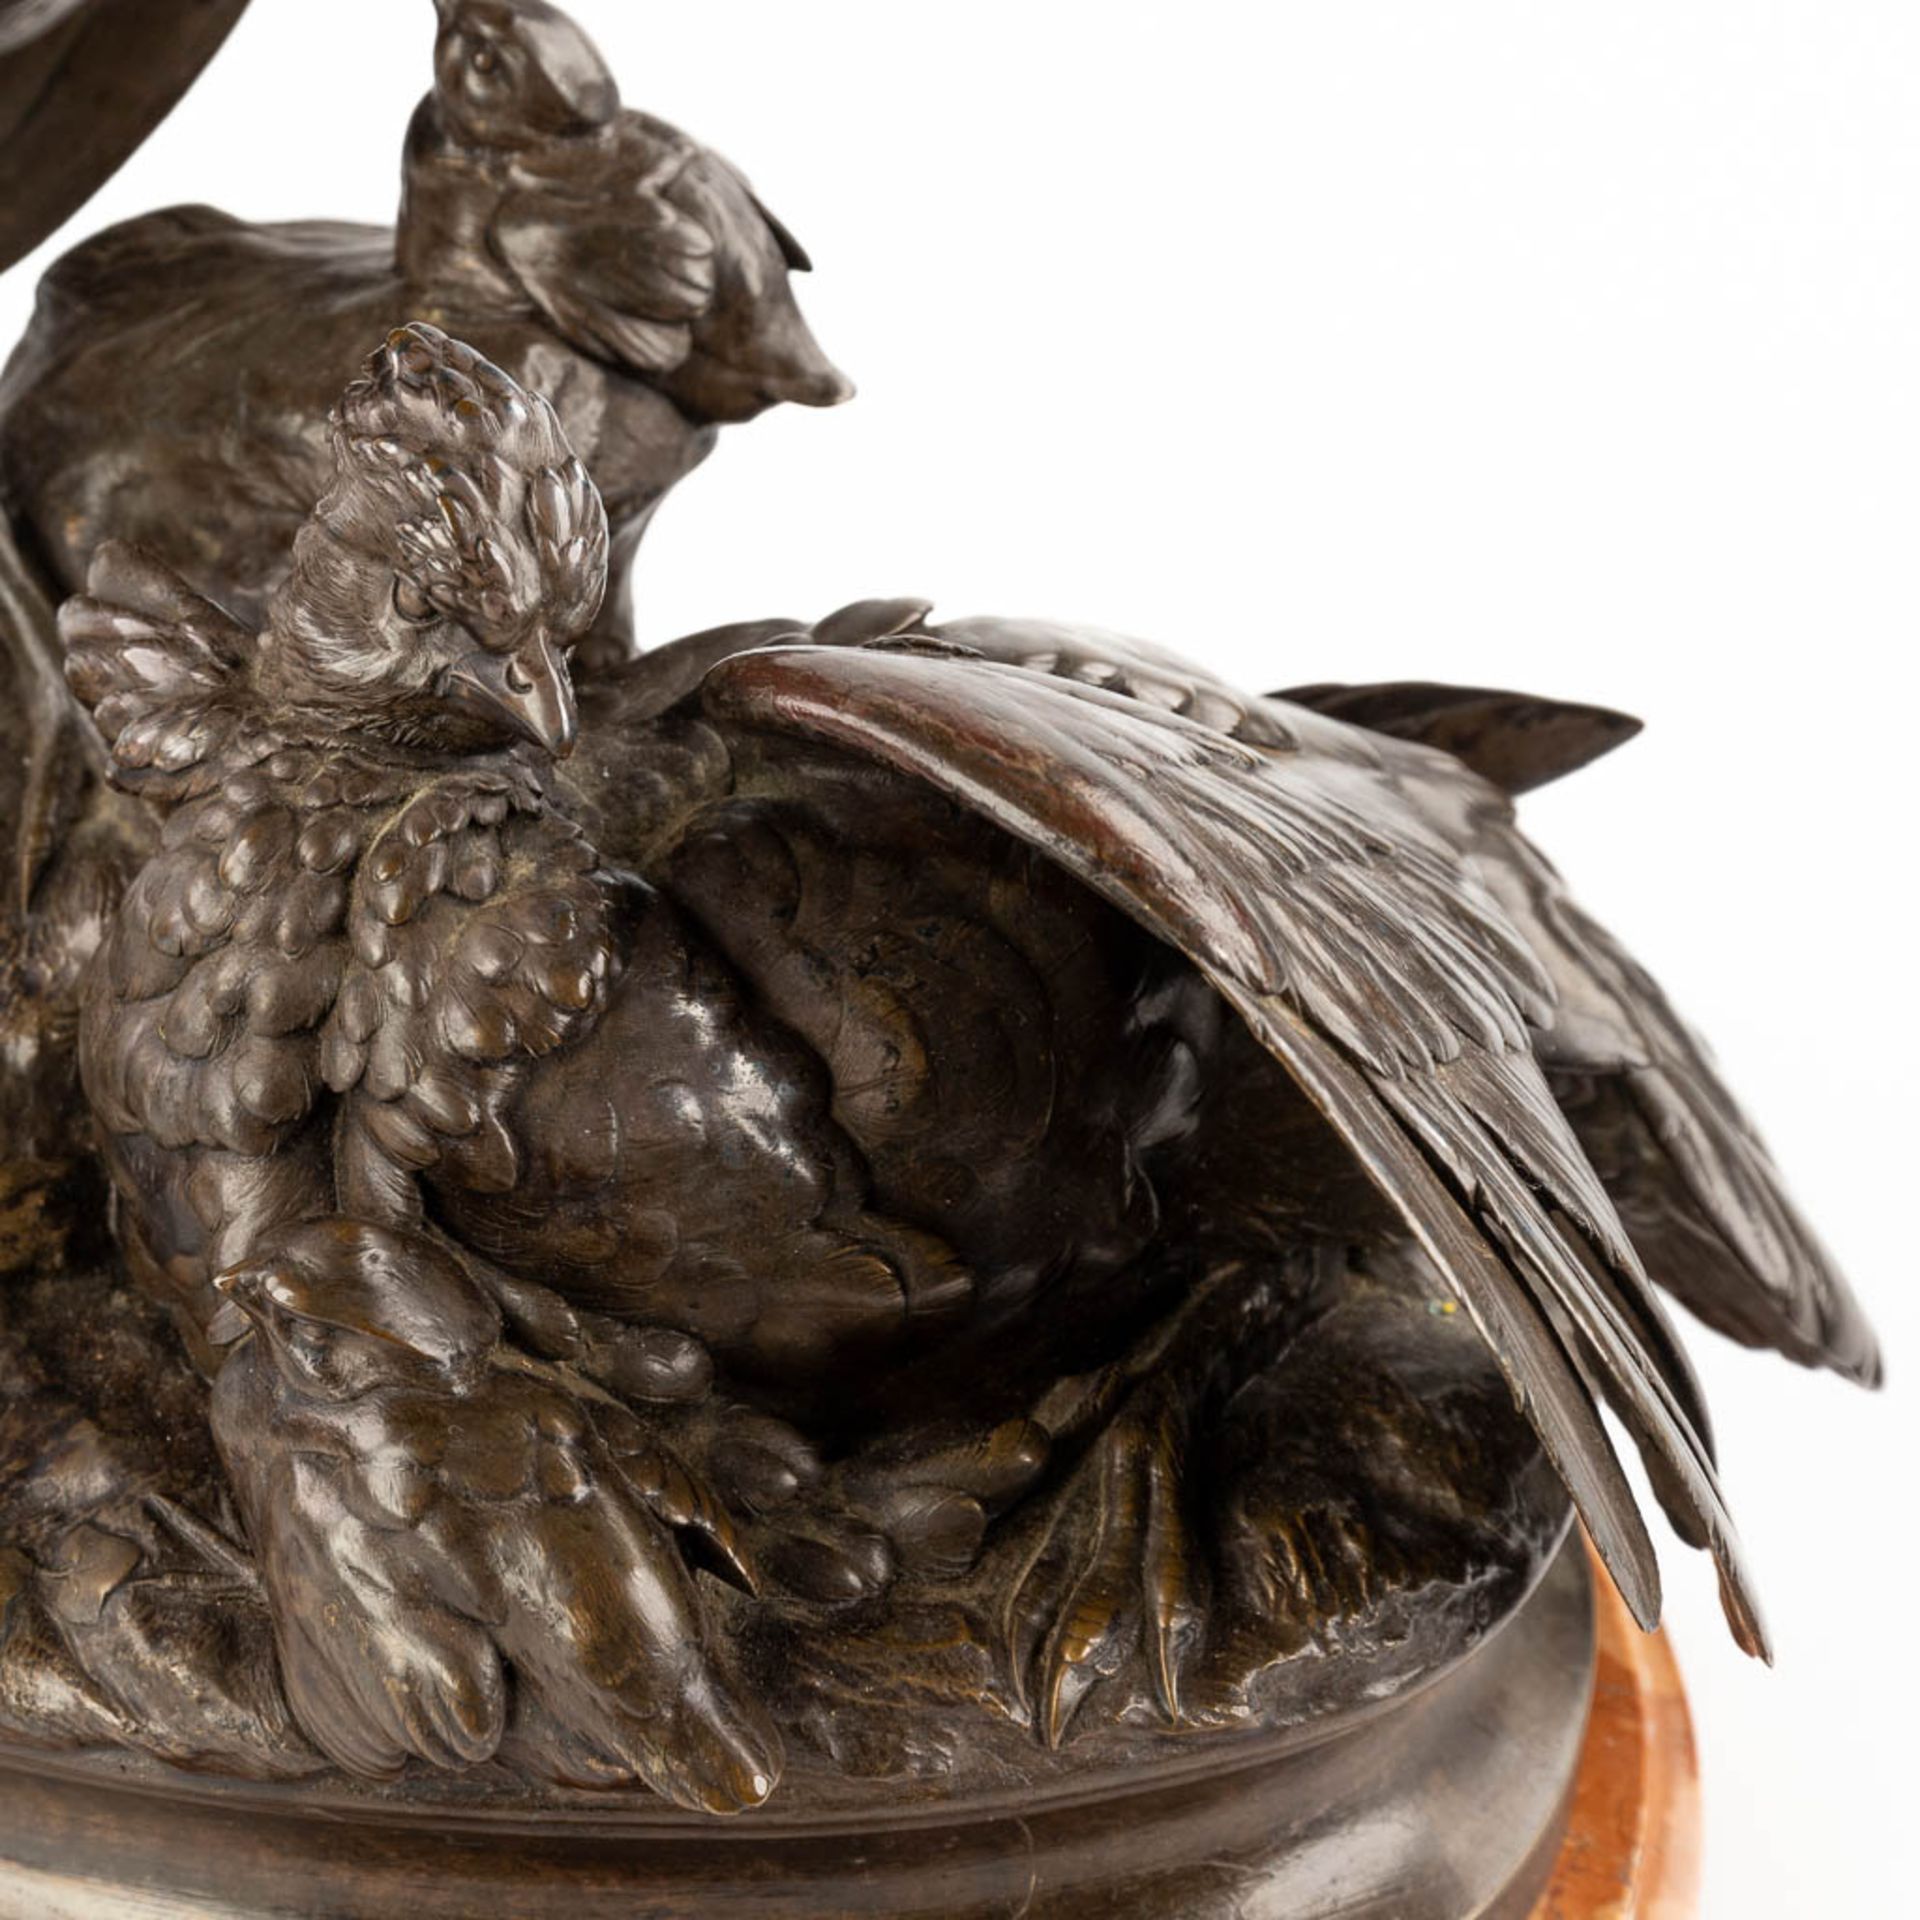 Alphonse ARSON (1822-1895) 'Partridge with chicks' patinated bronze. 1877. (D:22 x W:40 x H:41 cm) - Image 11 of 14